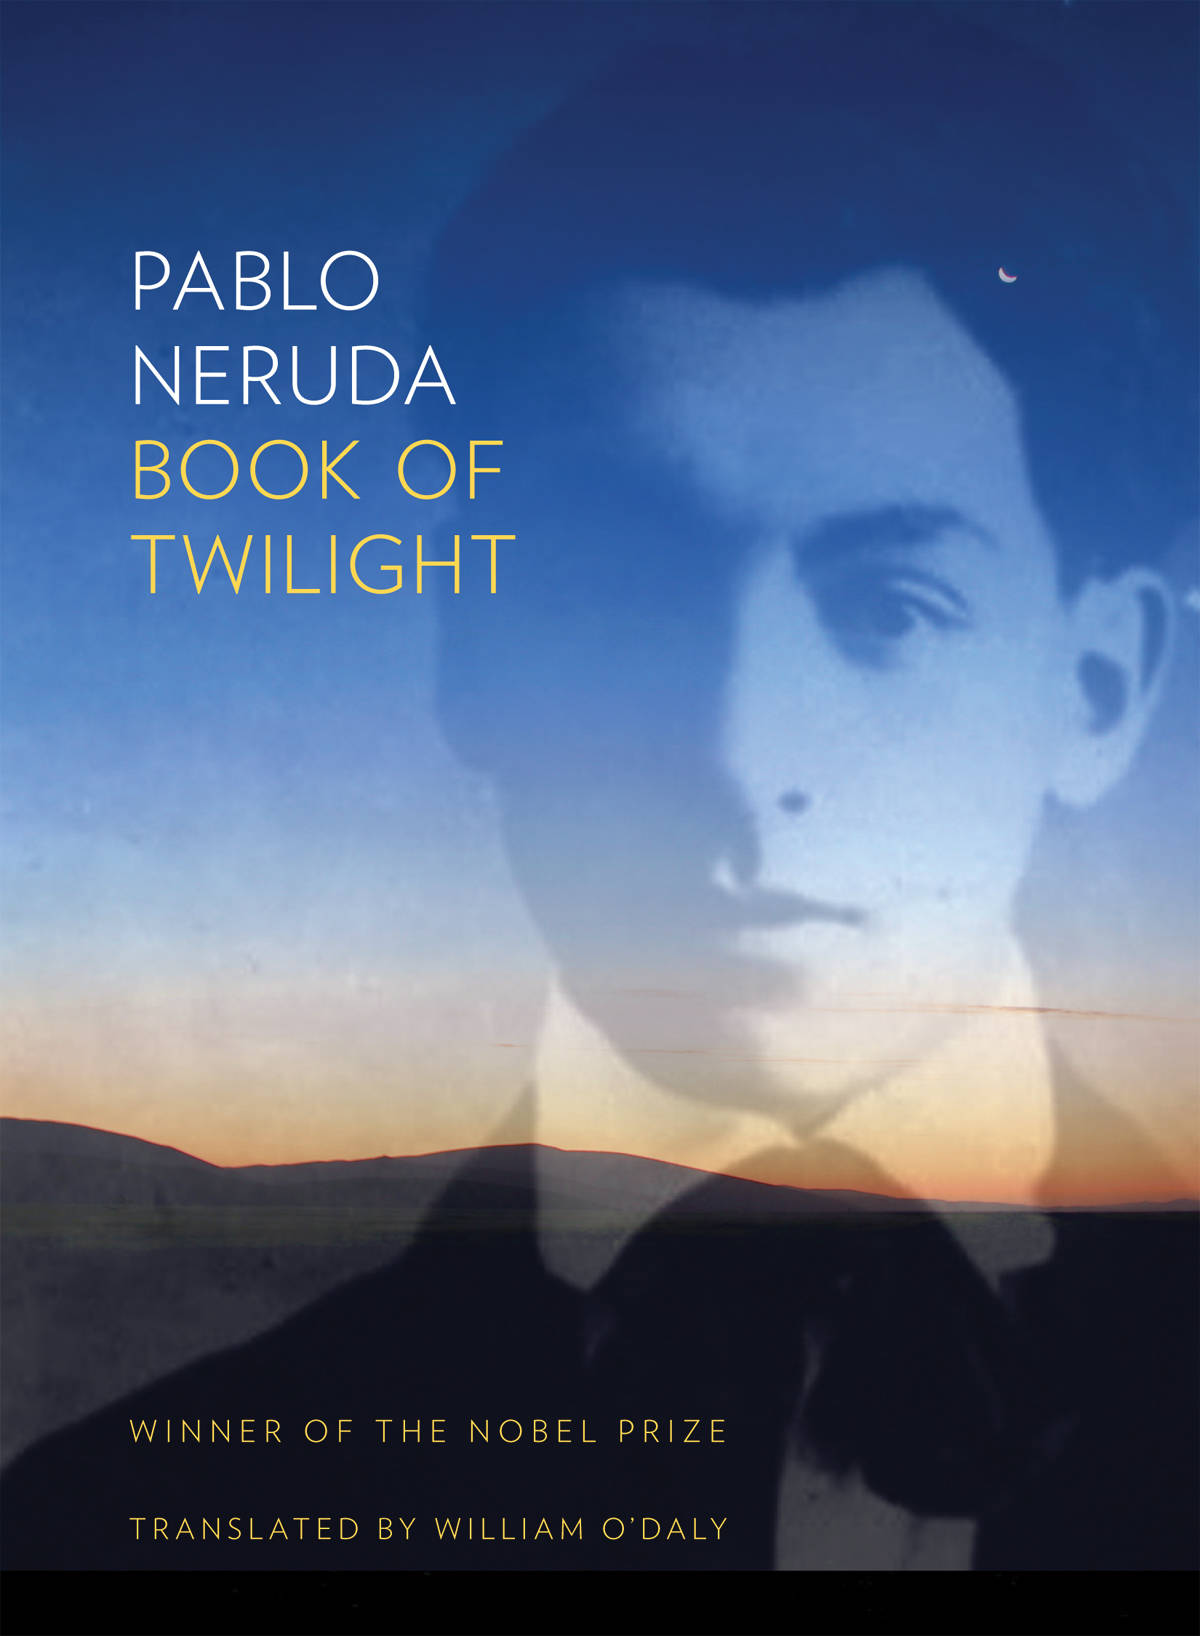 An evening with Pablo Neruda | William O’Daly reads